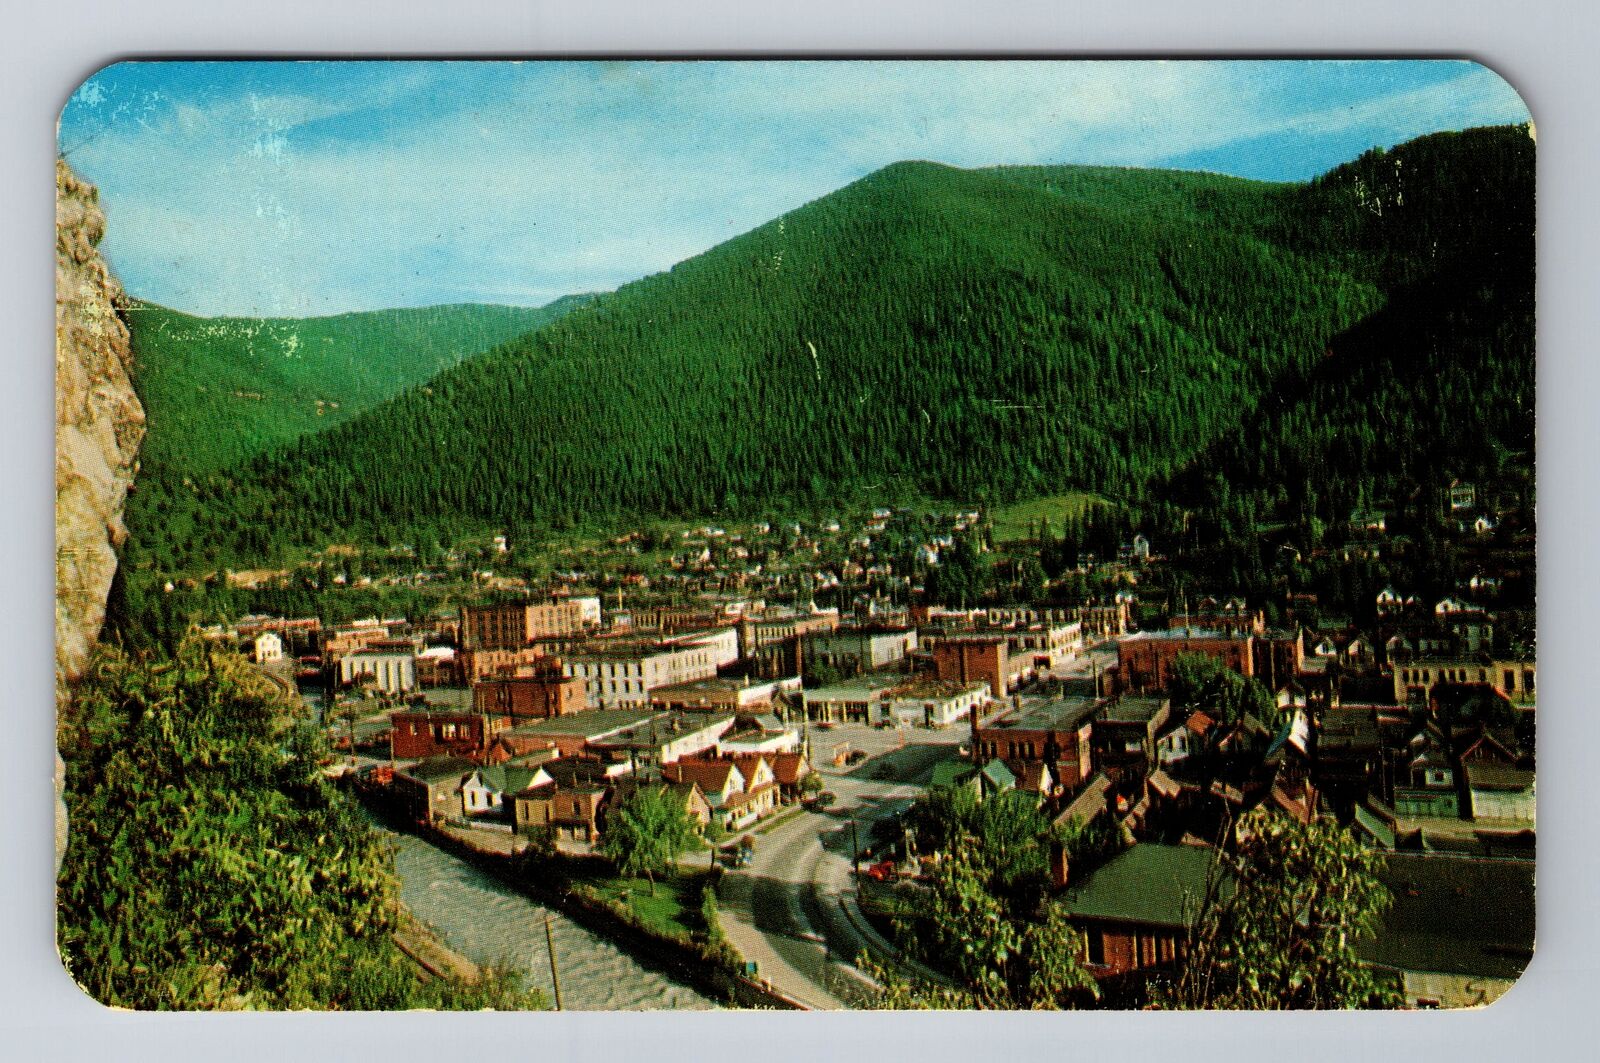 Wallace ID-Idaho, Birds Eye View of Town, c1962 Antique Vintage Postcard